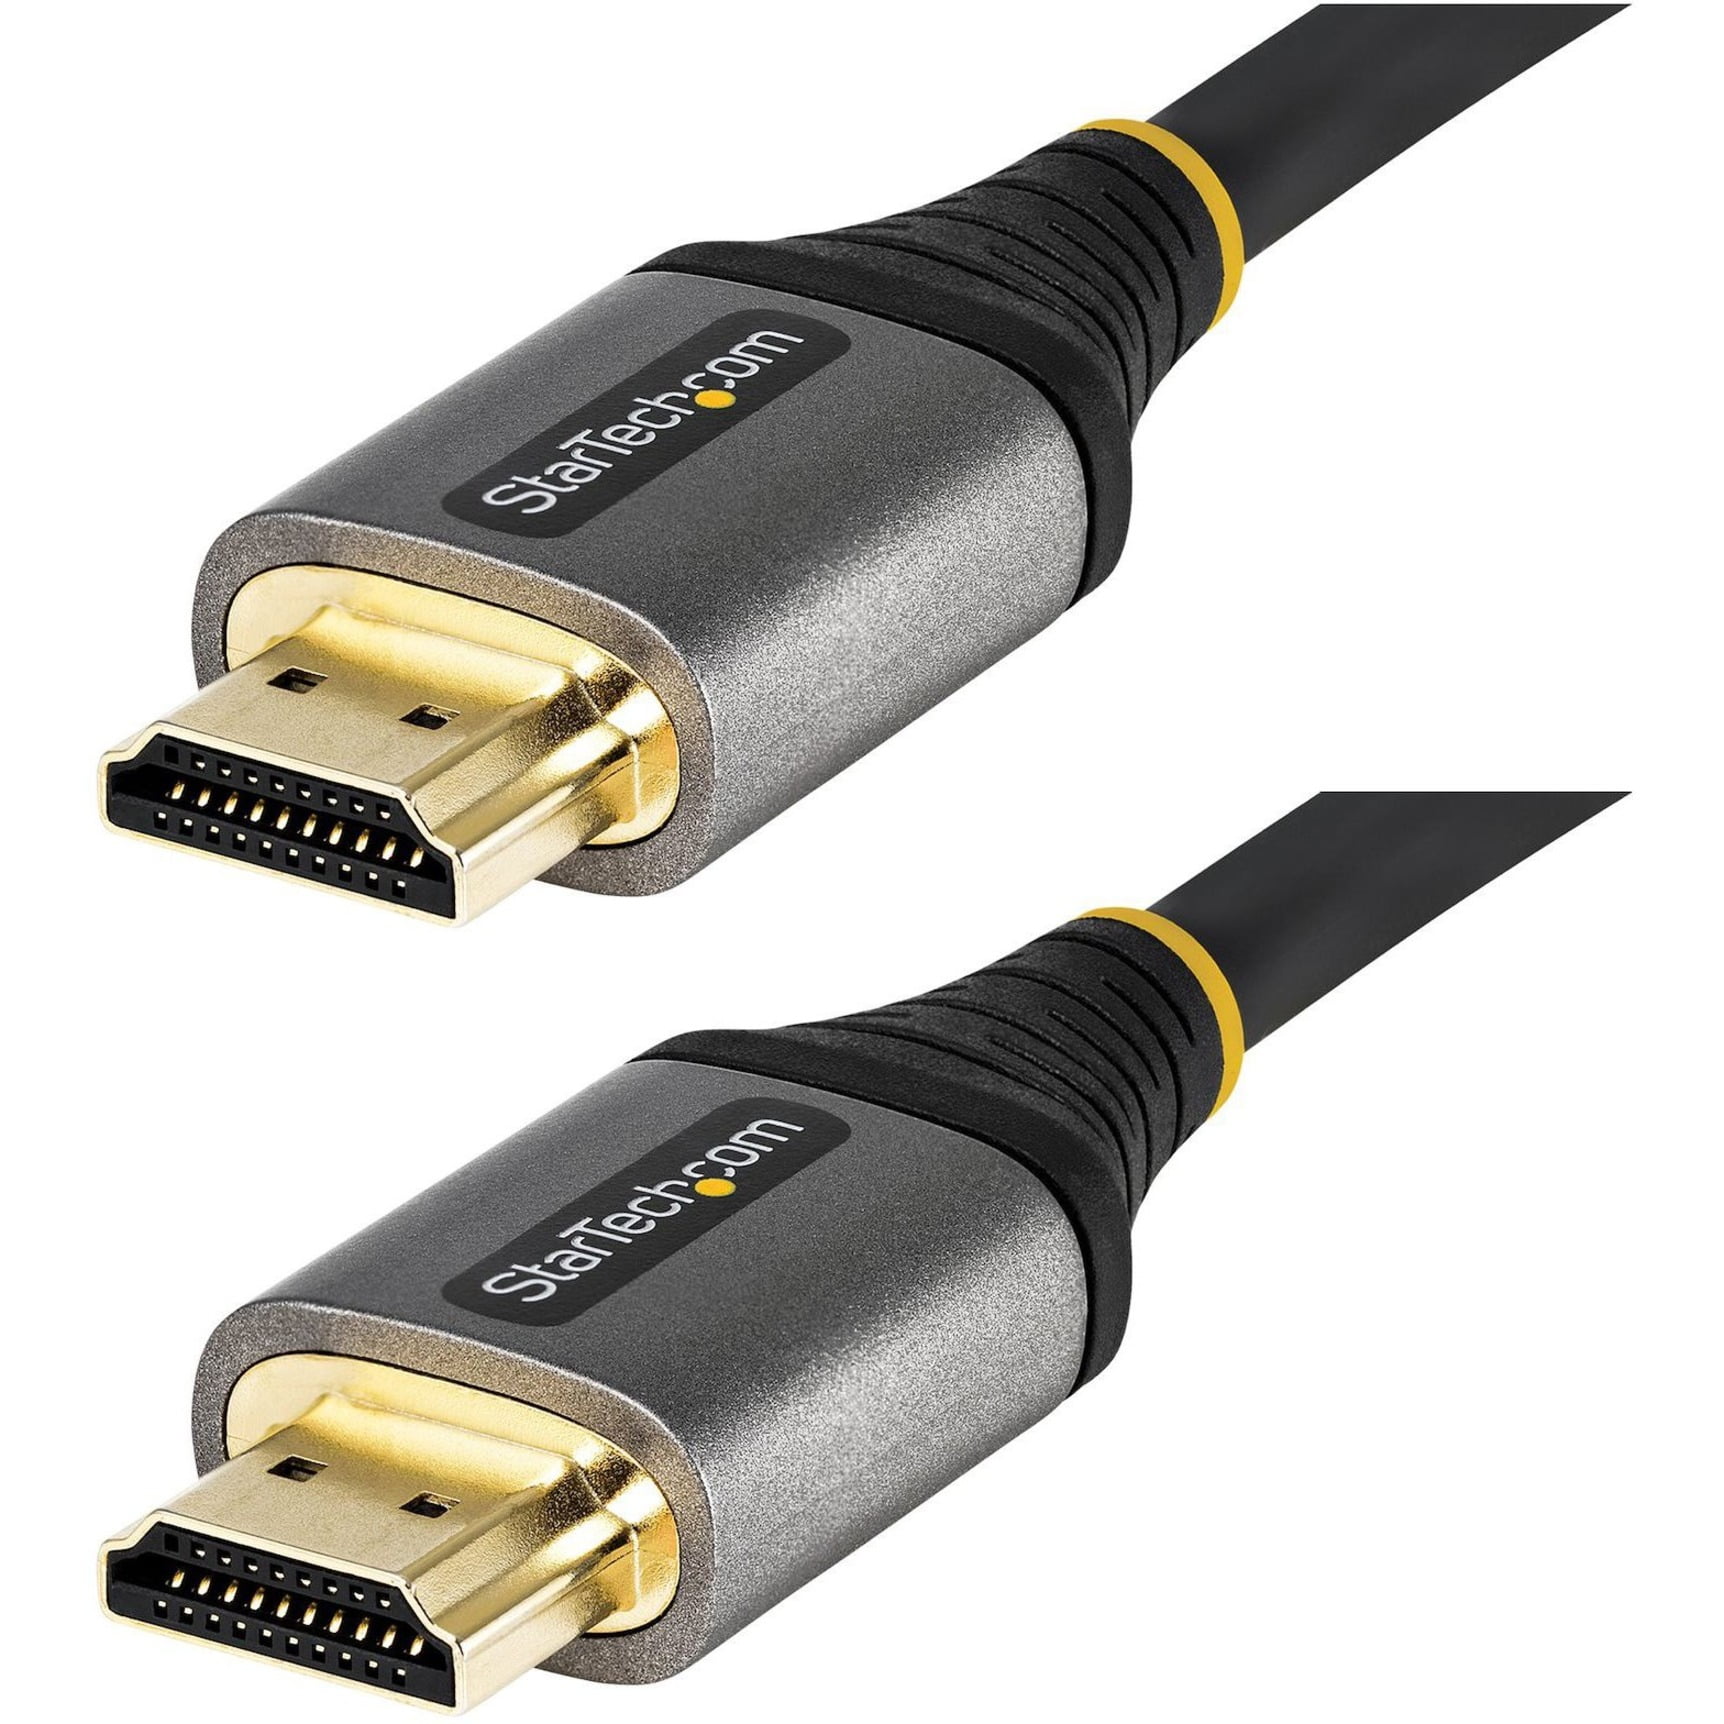 4K HDMI Cable 3.3ft,Sweguard HDMI 2.0 Cable High Speed 18Gbps Gold Plated Nylon Braid HDMI Cord Supports 4K@60Hz,2K@144Hz,3D,HDR,UHD 2160P,1440P,1080P,HDCP 2.2,ARC for Apple TV,Fire TV,PS4,PS3,PC-Red 